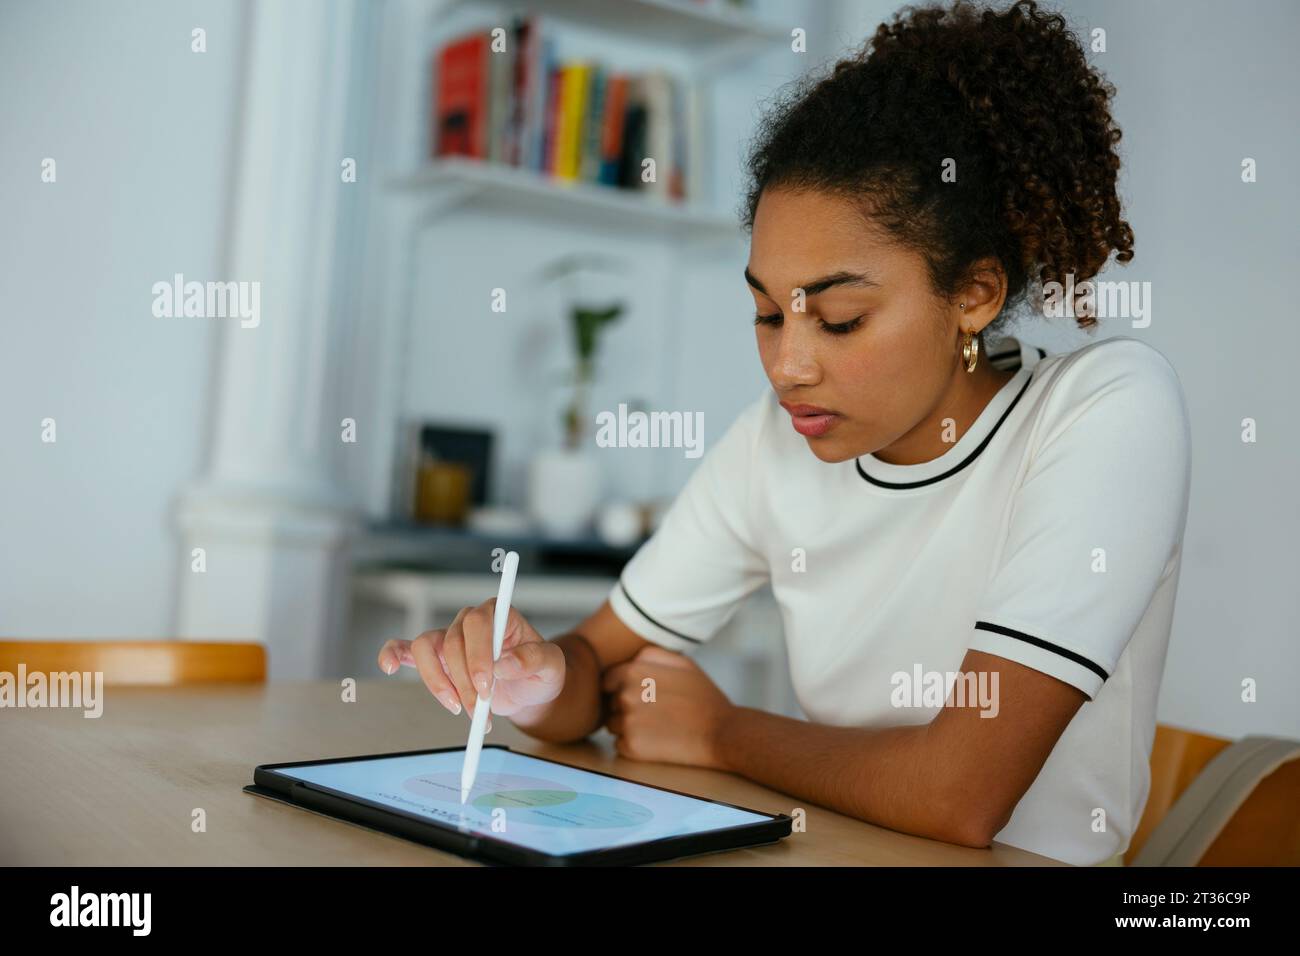 Student studying and writing on tablet PC at desk Stock Photo